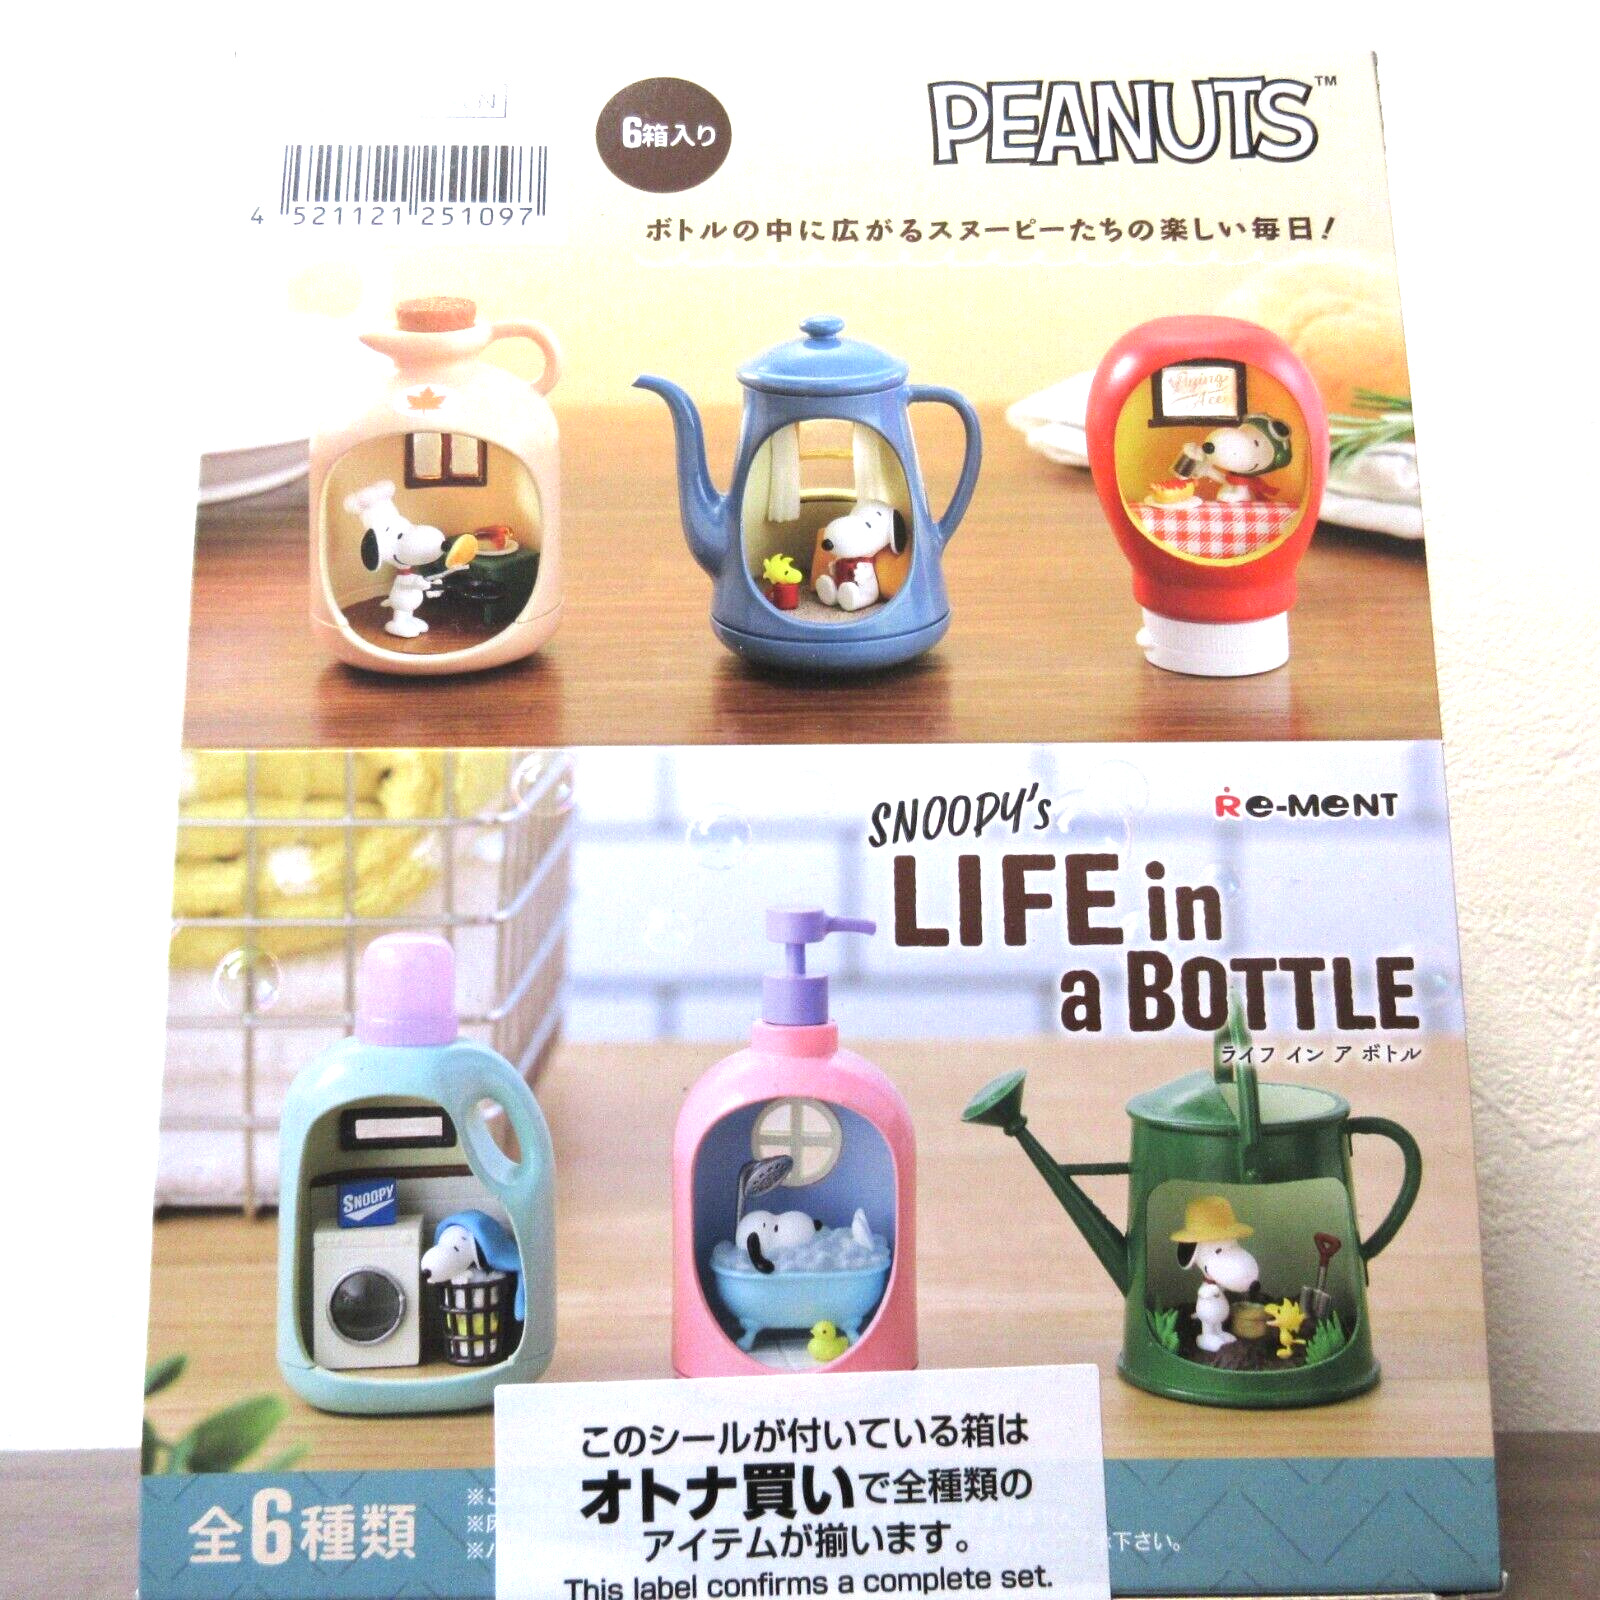 [US STOCK] RE-MENT Peanuts SNOOPY's LIFE in a BOTTLE 6 Pack BOX Complete set New